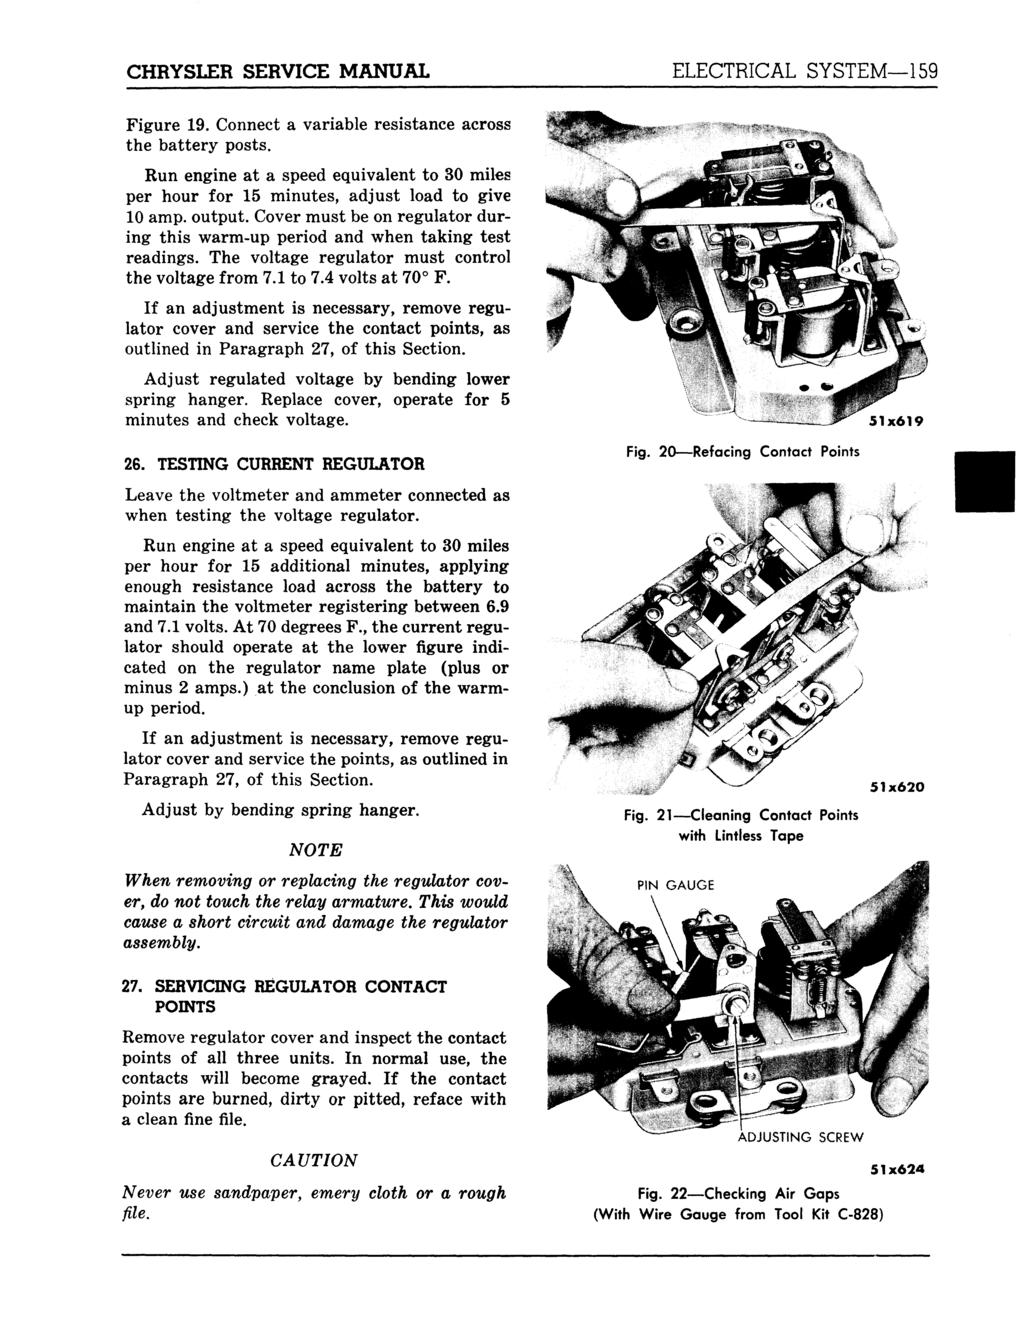 CHRYSLER SERVICE MANUAL ELECTRICAL SYSTEM 159 Figure 19. Connect a variable resistance across the battery posts.